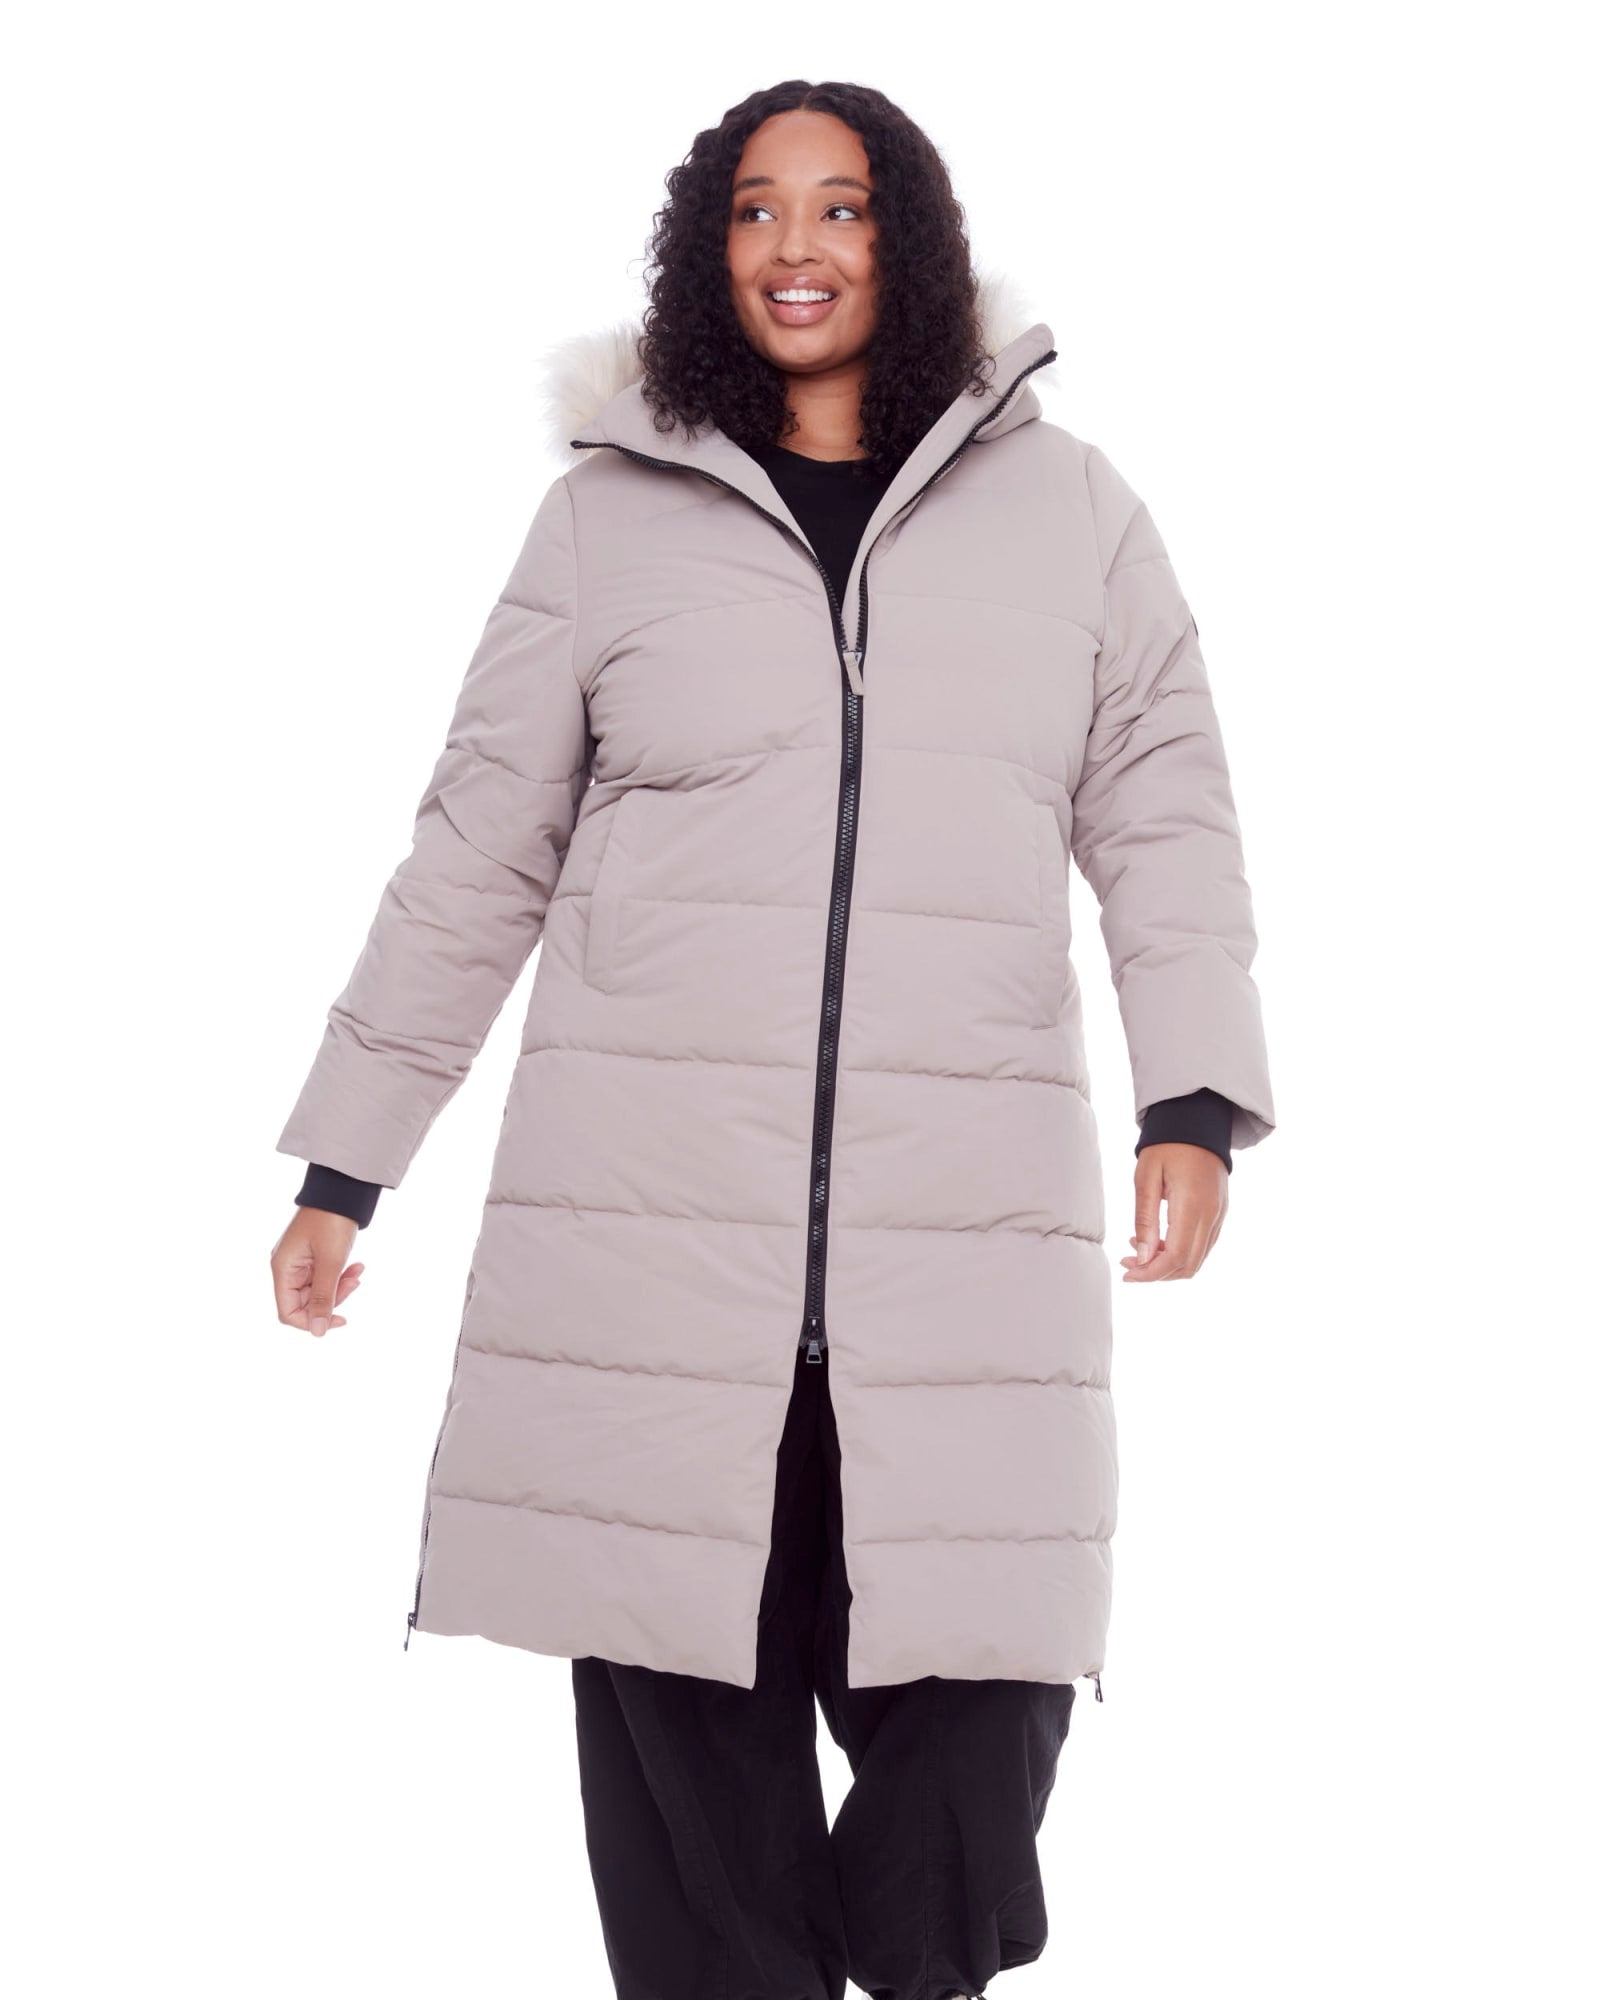 Plus Size Insulated Jackets